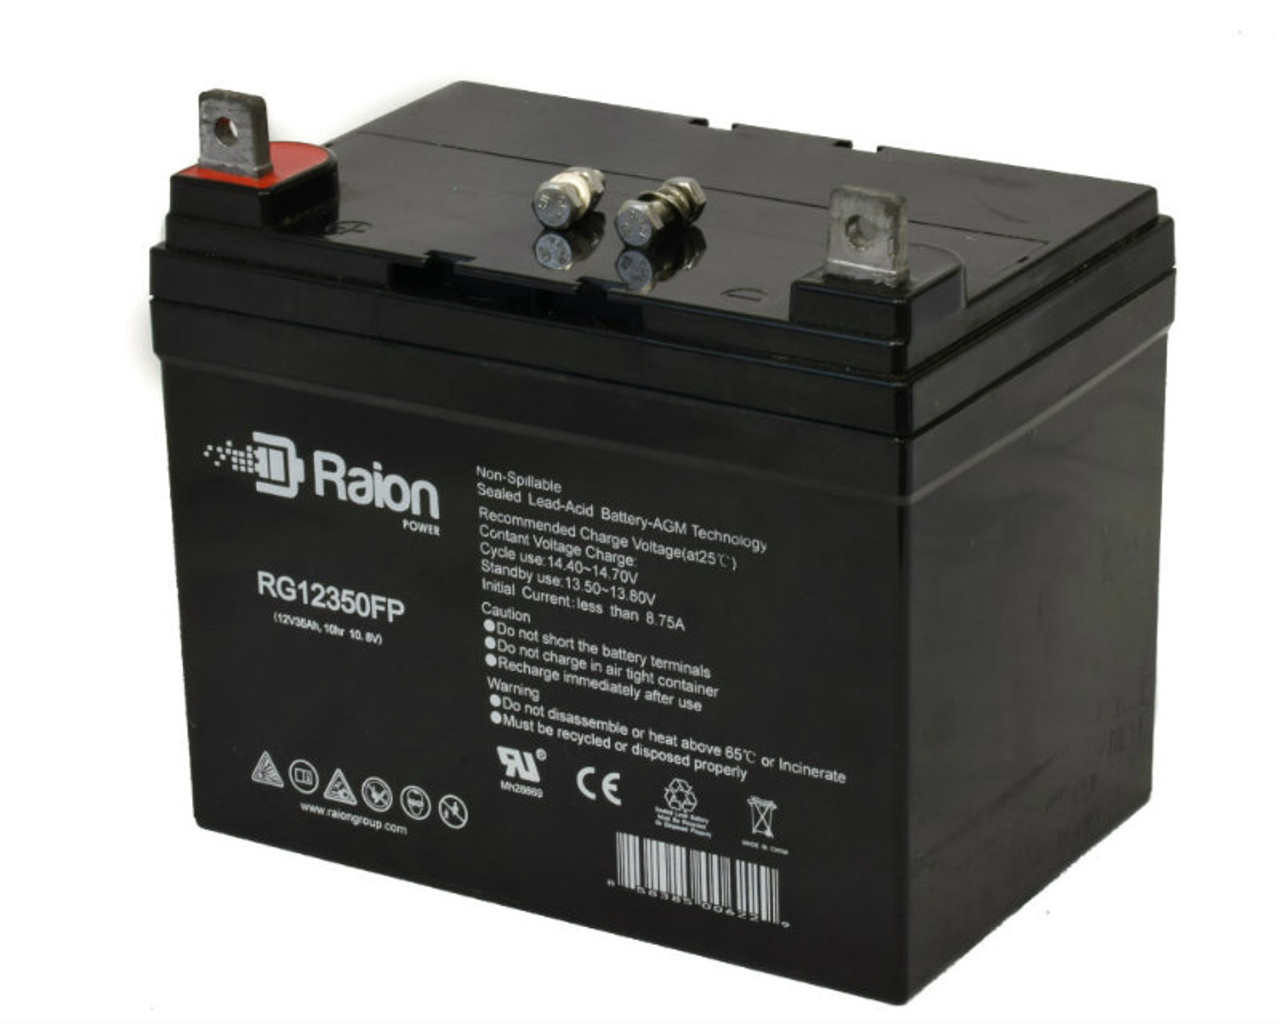 Raion Power Replacement 12V 35Ah RG12350FP Battery for Cub Cadet 3000 SERIES